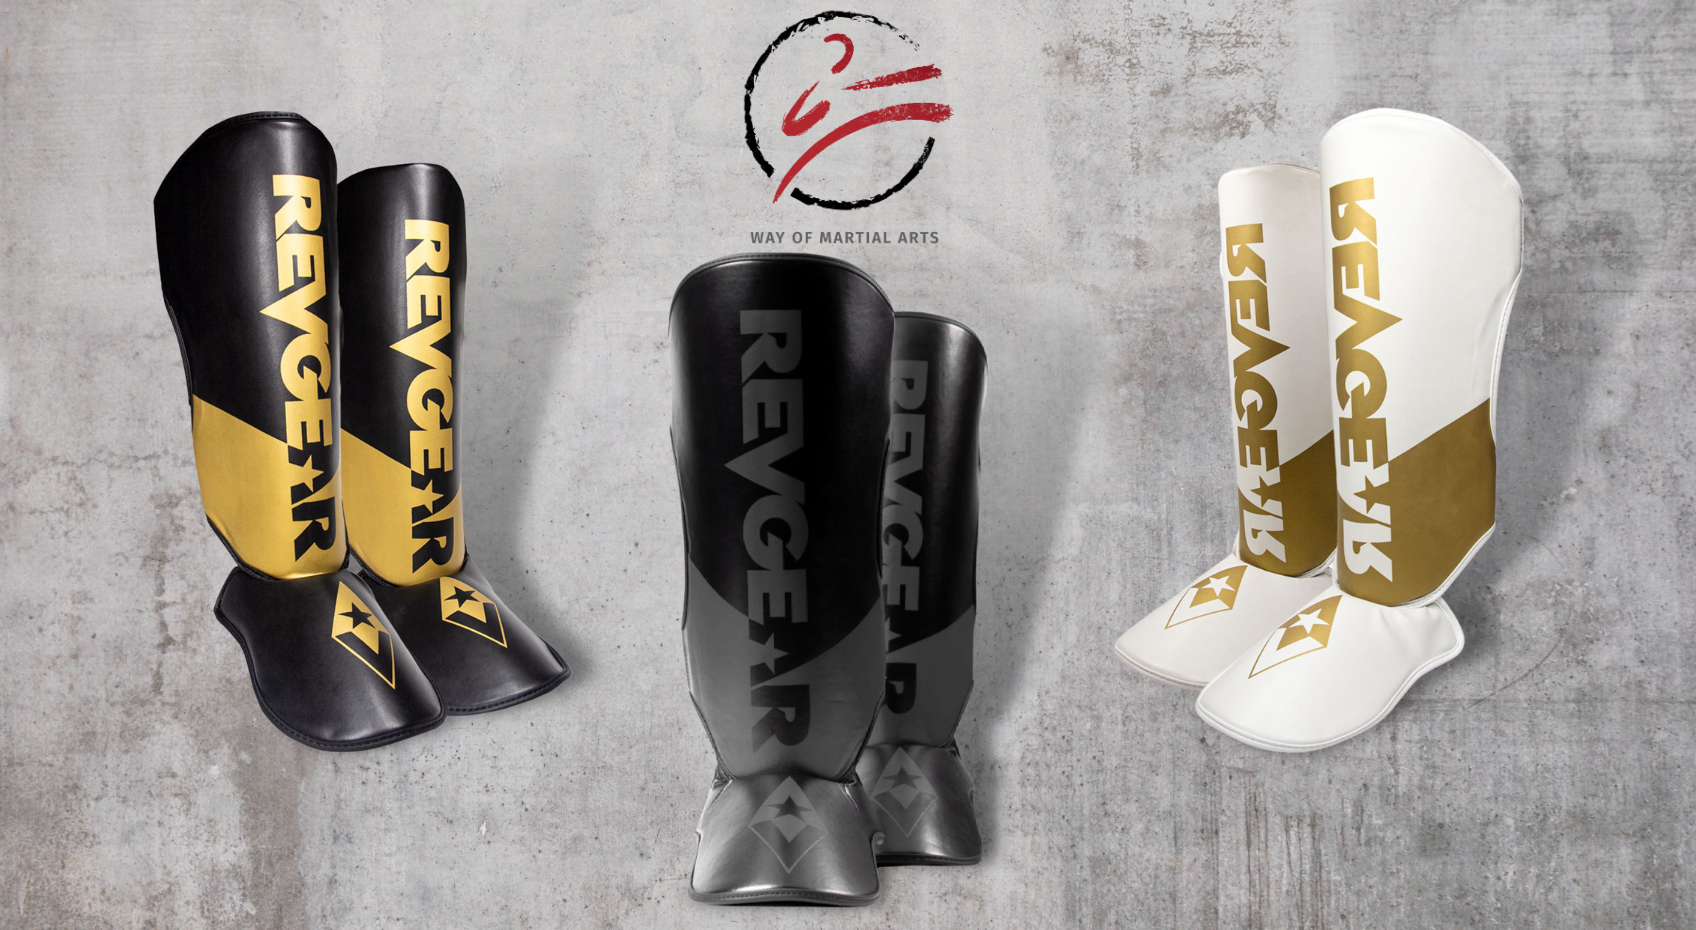 Revgear shin guards offer protection for muay thai, kick boxing and mma sparring. This adult shin guard offer shin protection with a perfect blend between double pad and generally lighter weight. Ideal in a competitive situation or for training situations.